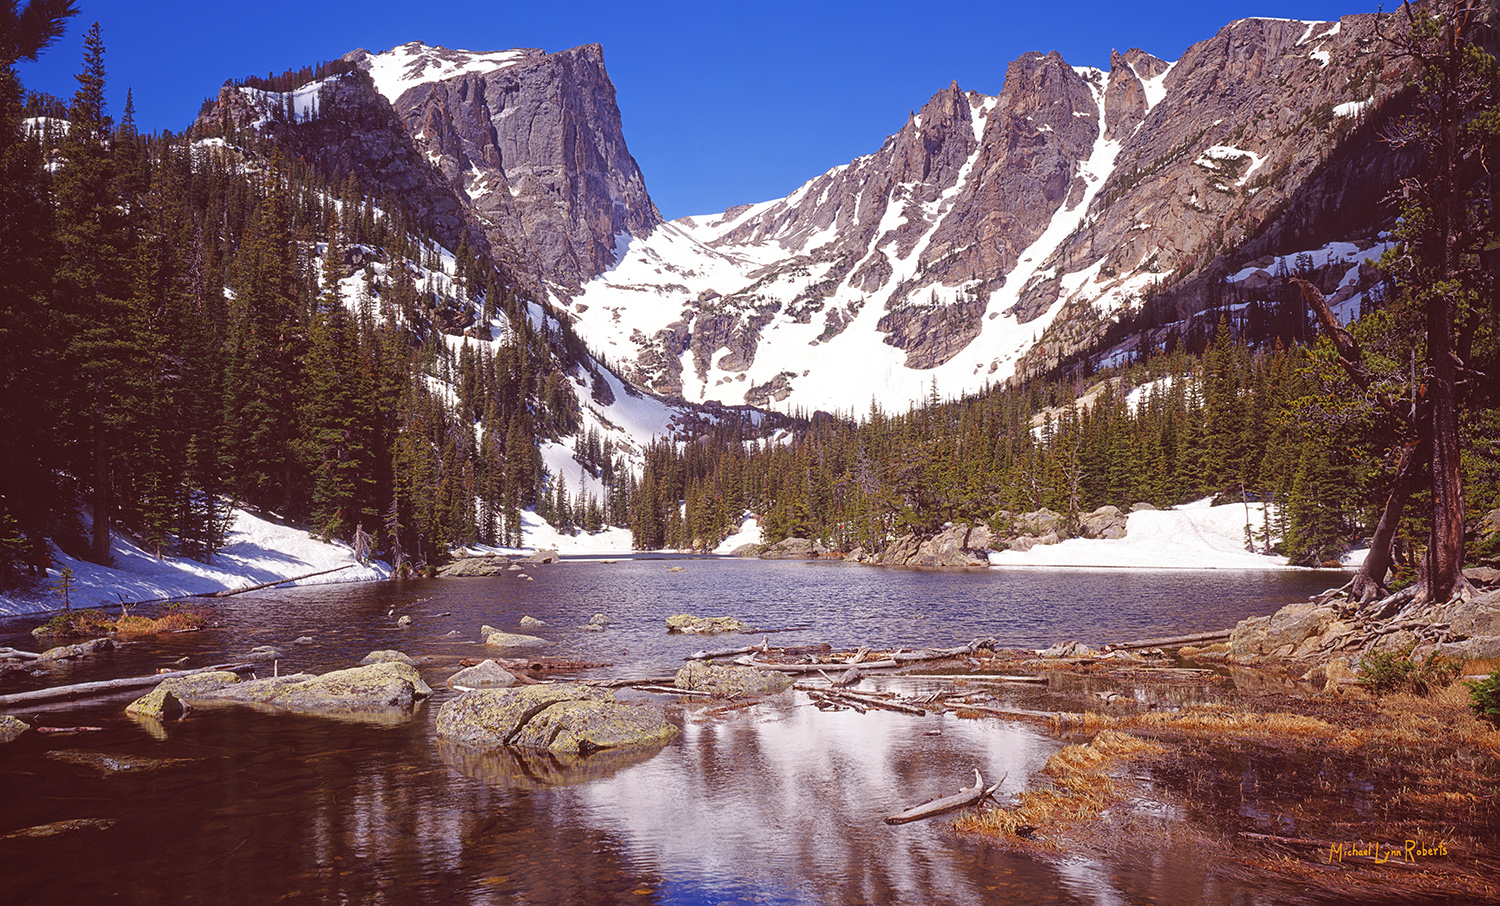 This is springtime at Dream Lake. The warm sun has melted the lake's winter covering of ice and snow. The grasses have begun...